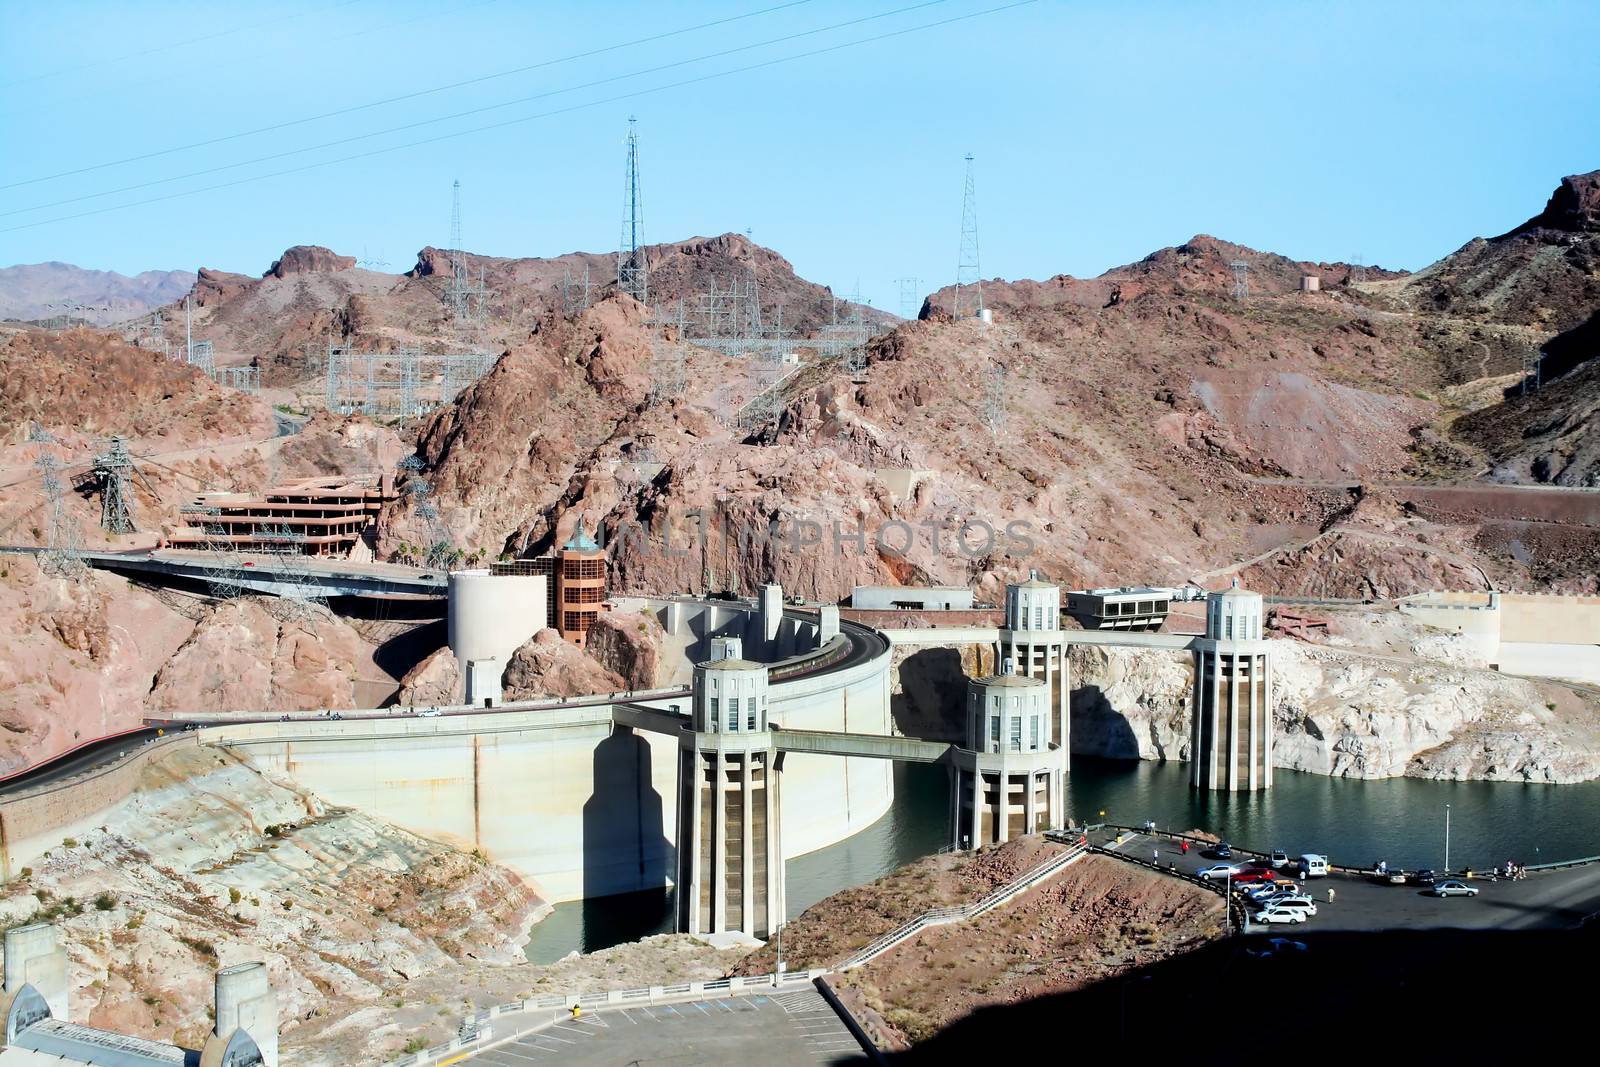 The Hoover Dam located 30 miles South East of Las Vegas.